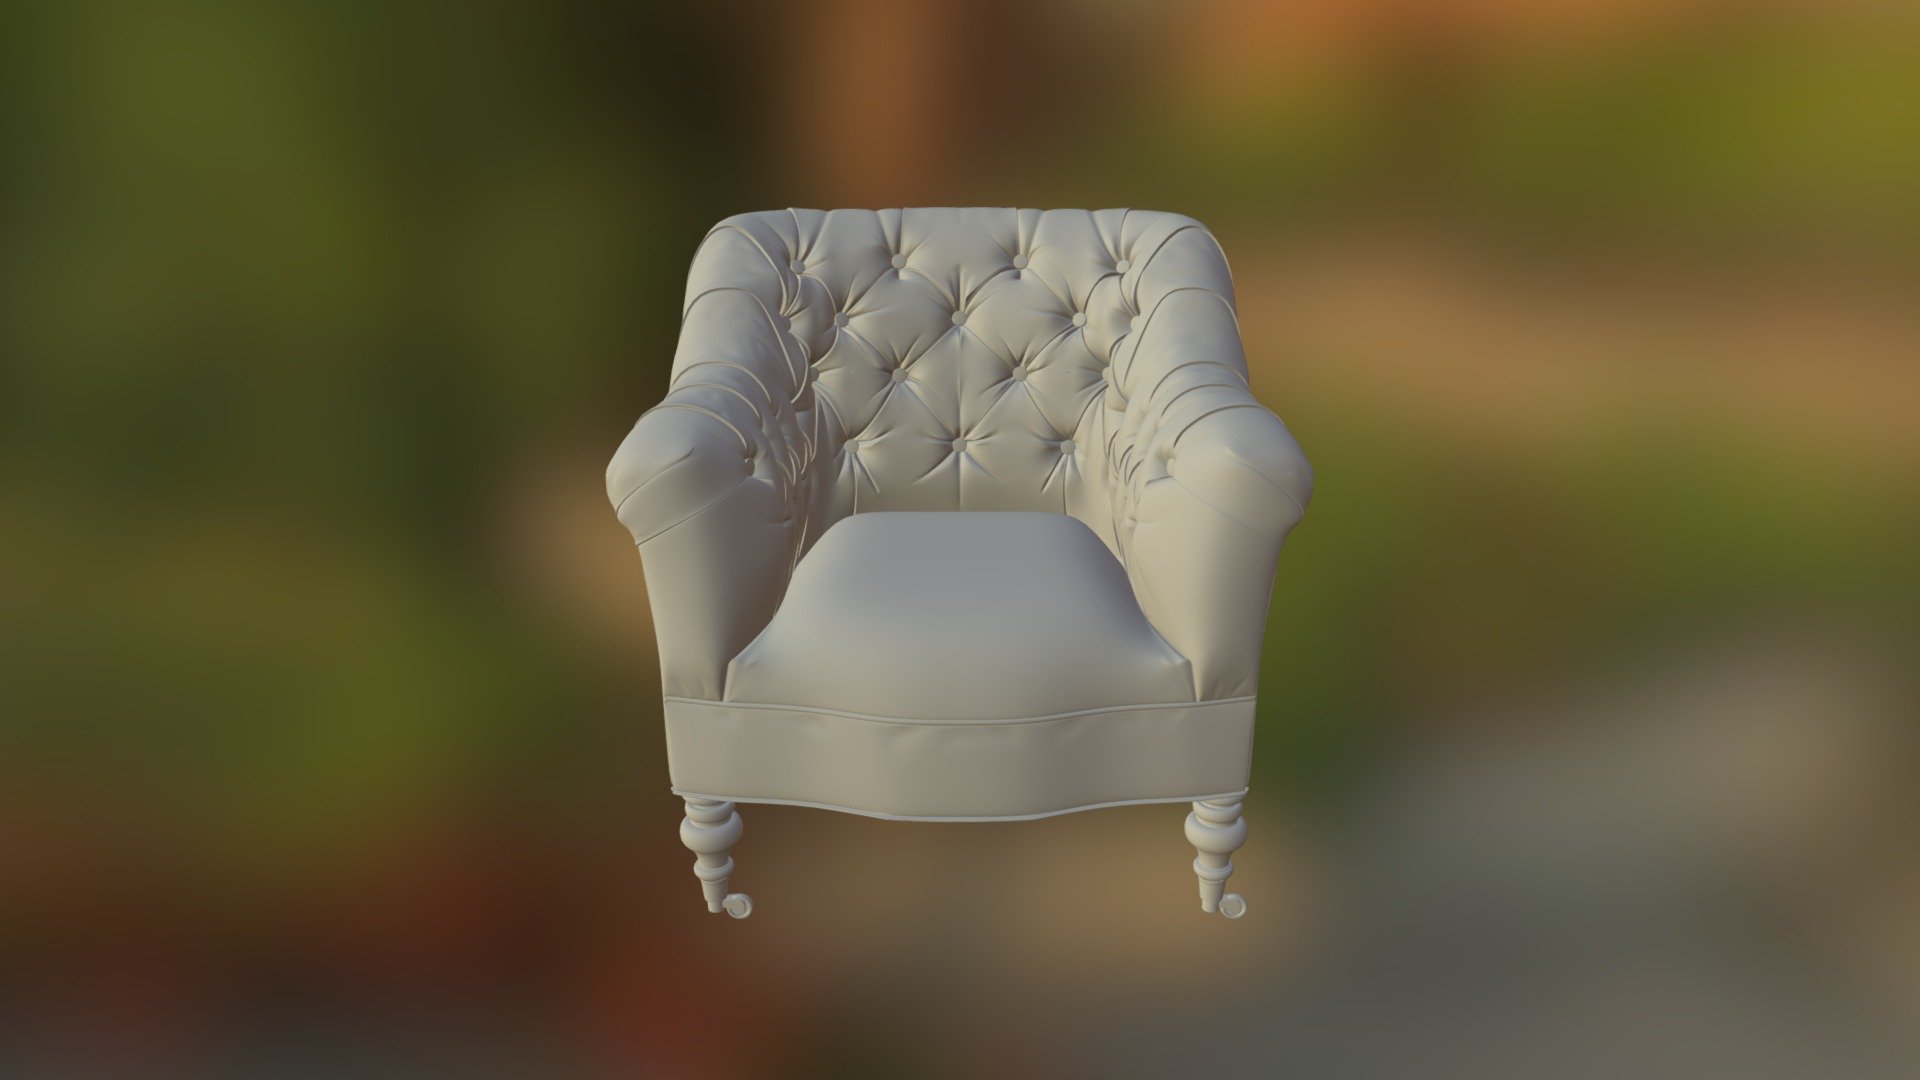 3ds max 2014 +fbx, procedural map, V ray material - Sutton Leather Chair - 3D model by Creative Market (@creativemarket) 3d model